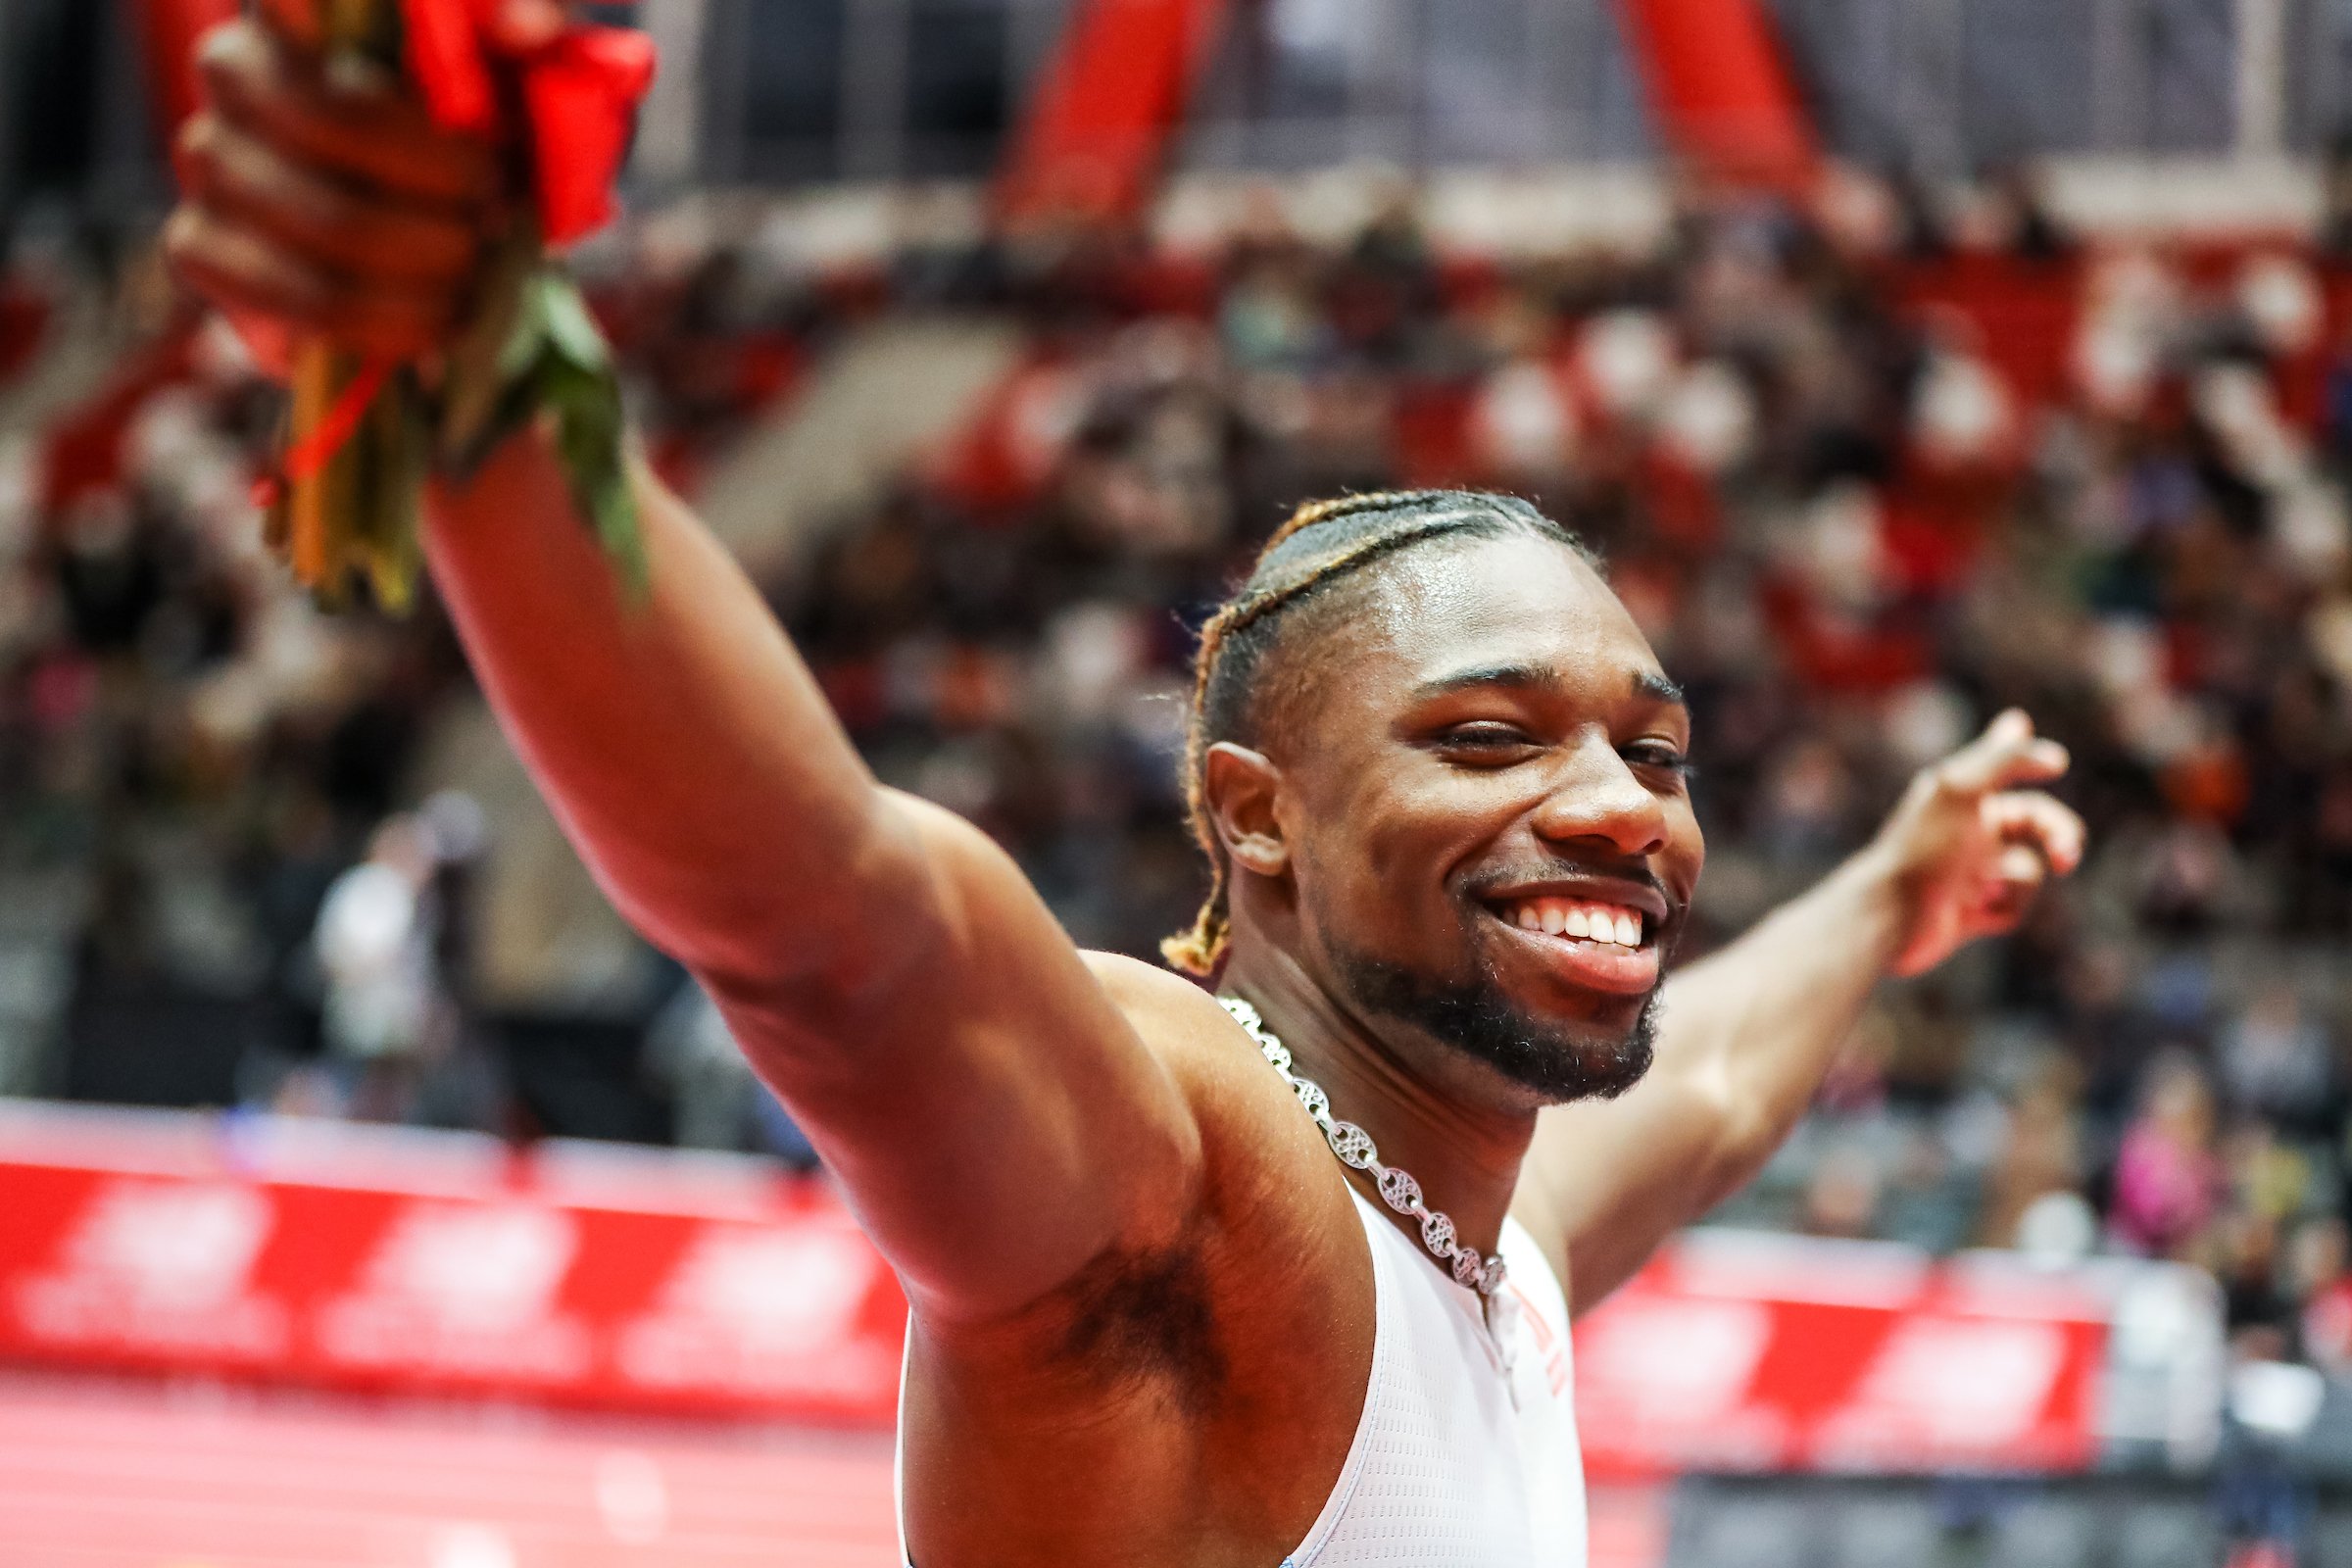 Noah Lyles Eyes 100m Gold, 18Second 200 and the 400 World Record